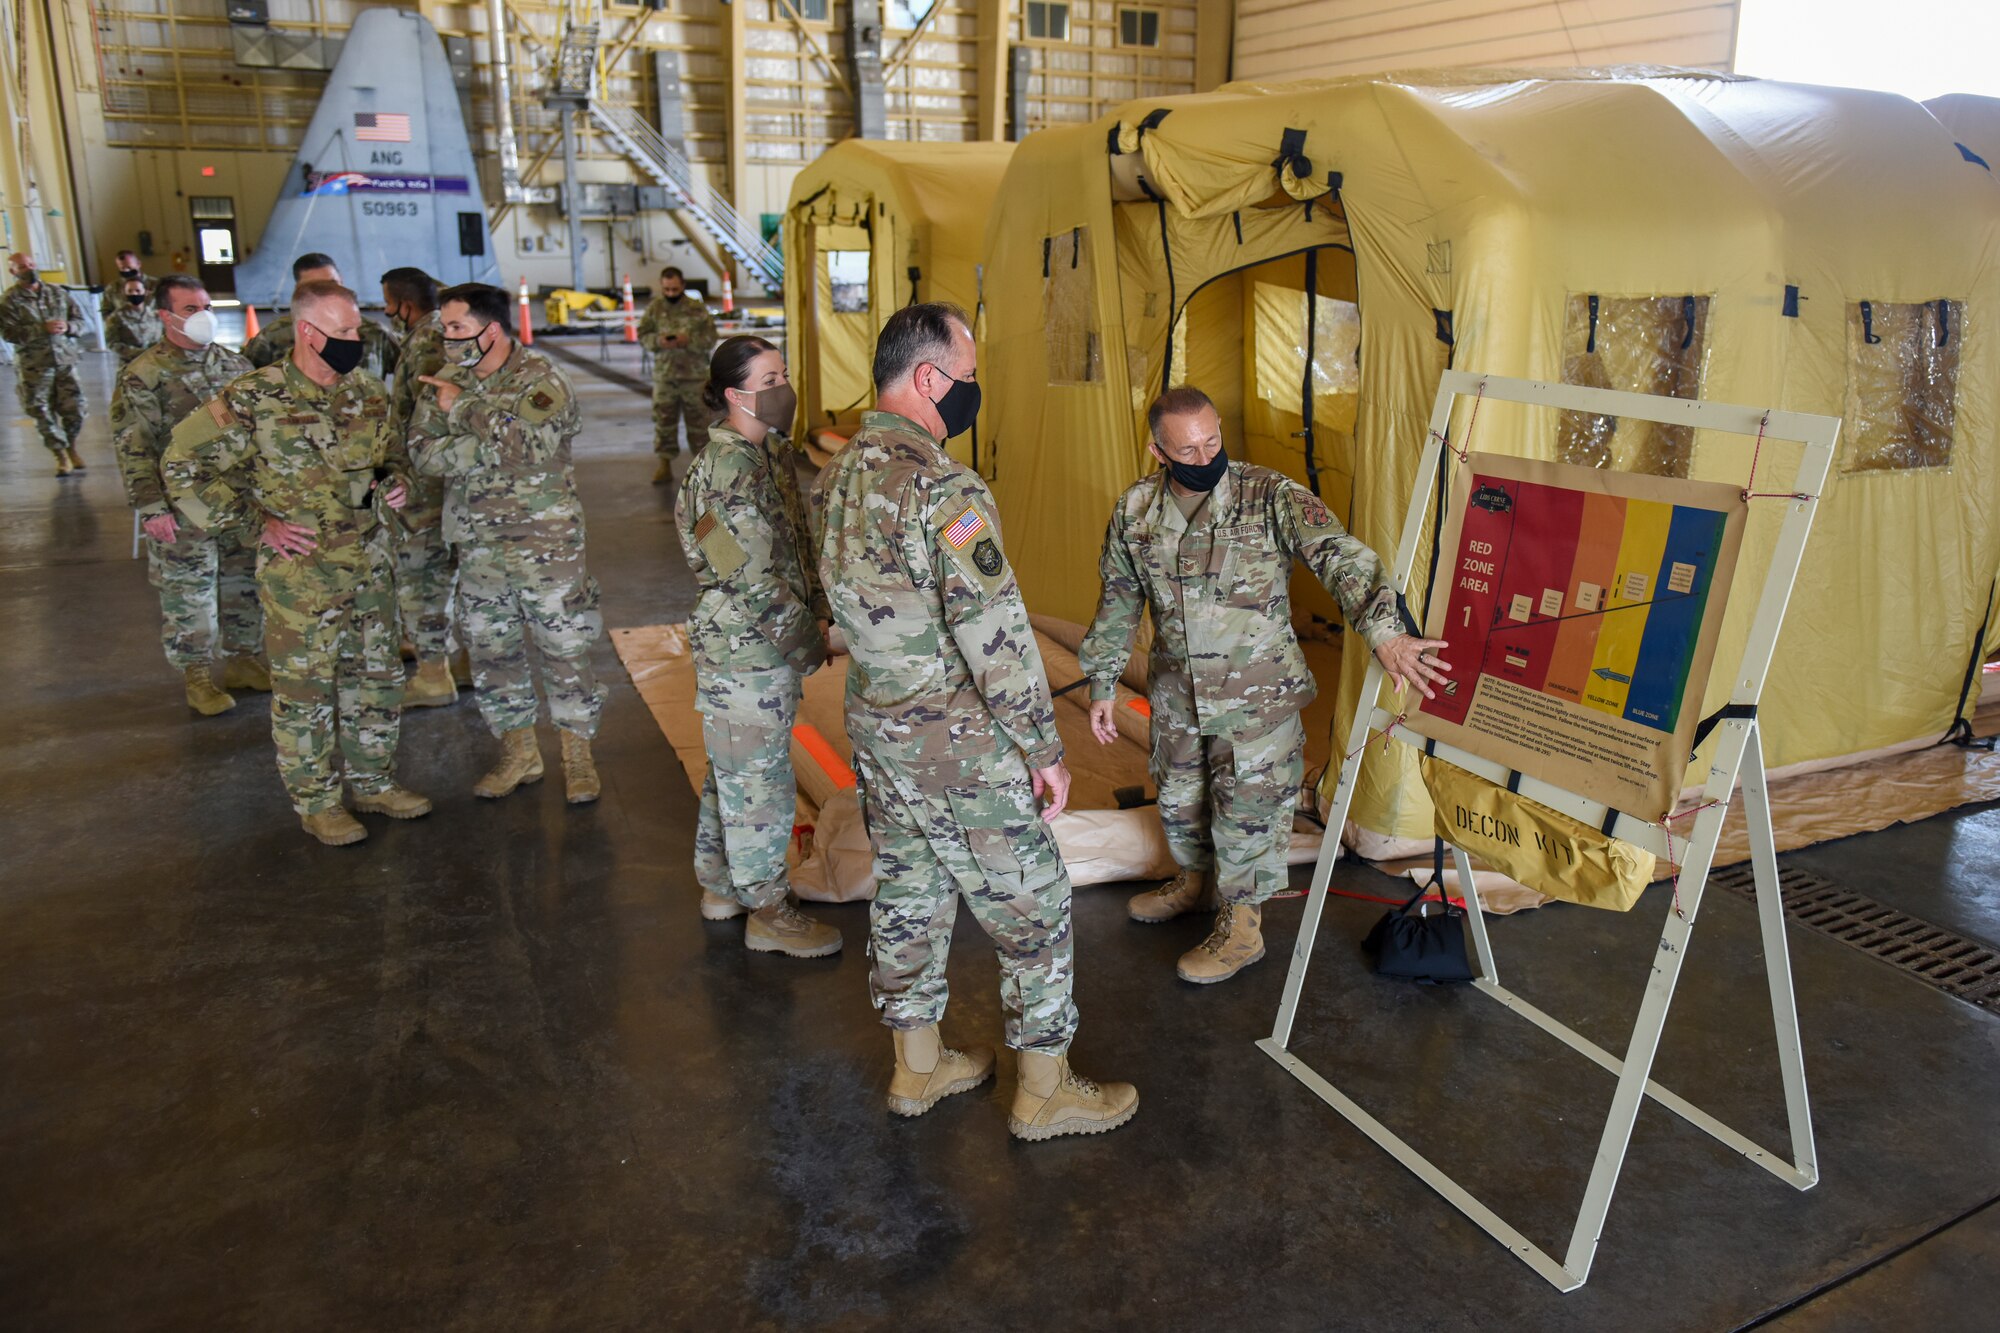 U.S. Army Maj. Gen. Jose Reyes, the adjutant general, Puerto Rico, visits the 156th Wing at Muñiz Air National Guard Base, Puerto Rico Air National Guard, Aug. 19, 2020, while touring base facilities and the training site for the Disaster Relief Bed-down Systems the unit recently received.